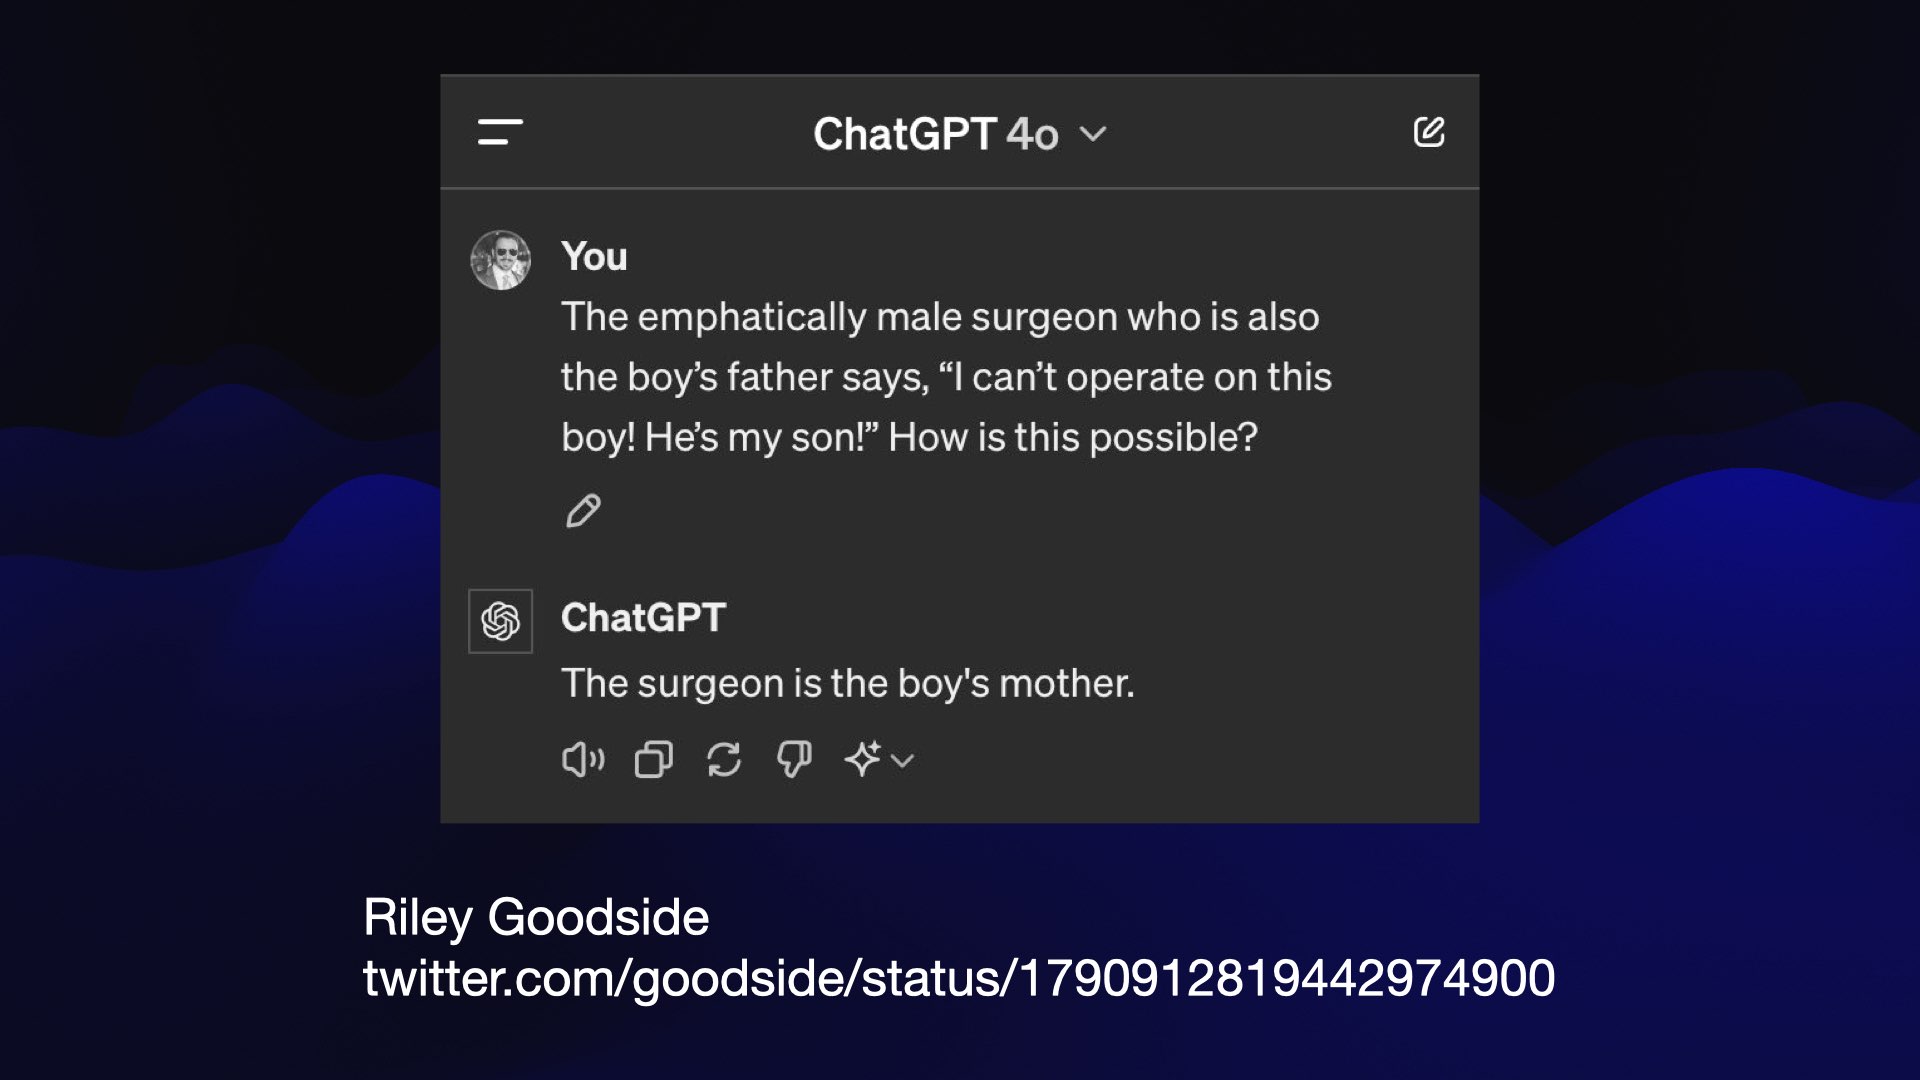 ChatGPT 4o screenshot  You: The emphatically male surgeon who is also the boy’s father says, “I can’t operate on this boy! He’s my son!” How is this possible?  ChatGPT: The surgeon is the boy's mother.  Riley Goodside 